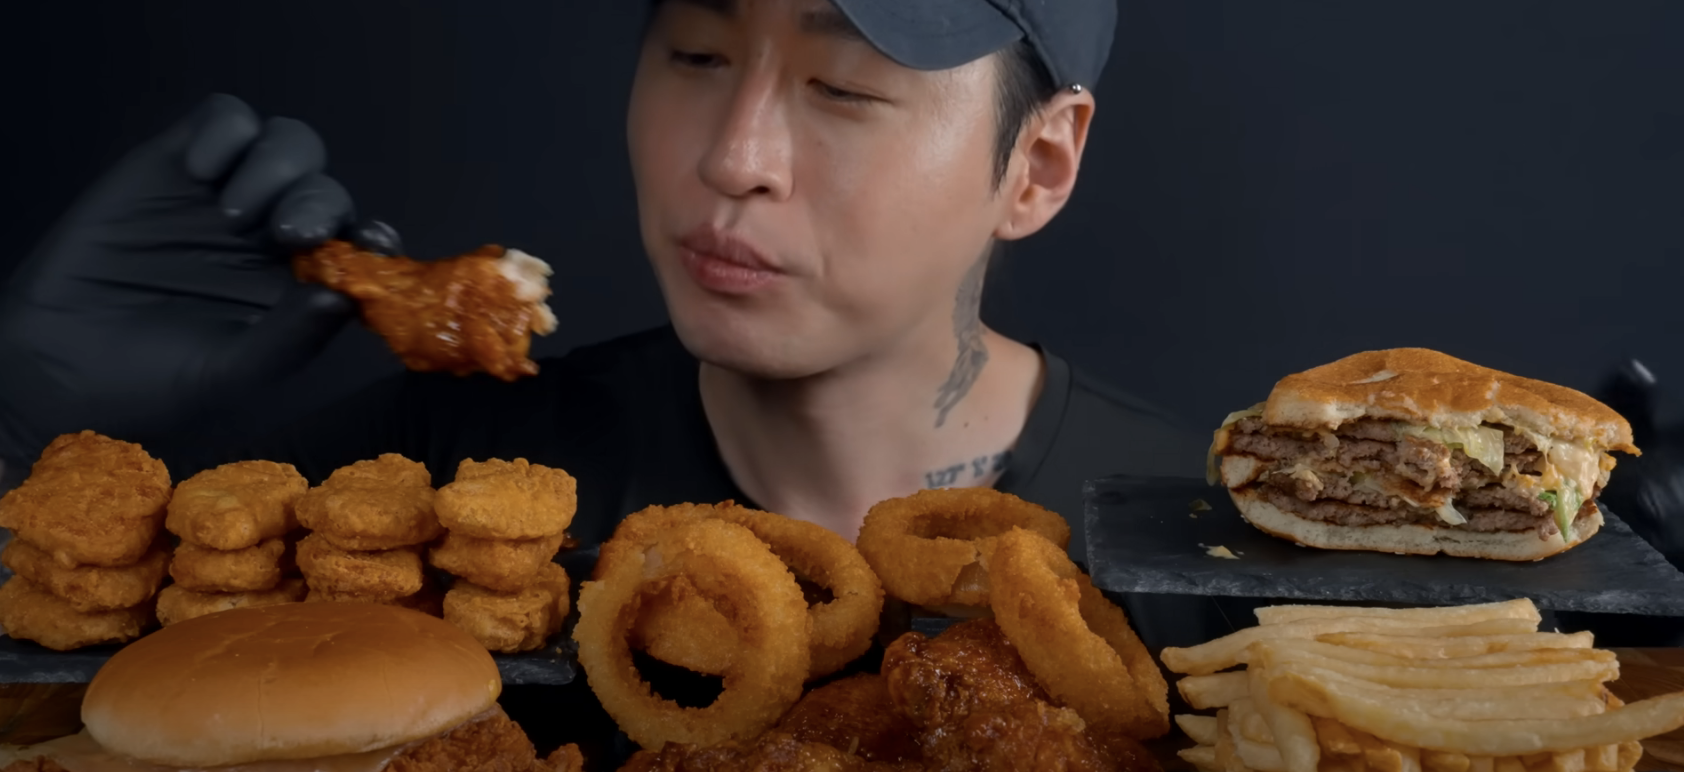 a person eating food in front of the camera